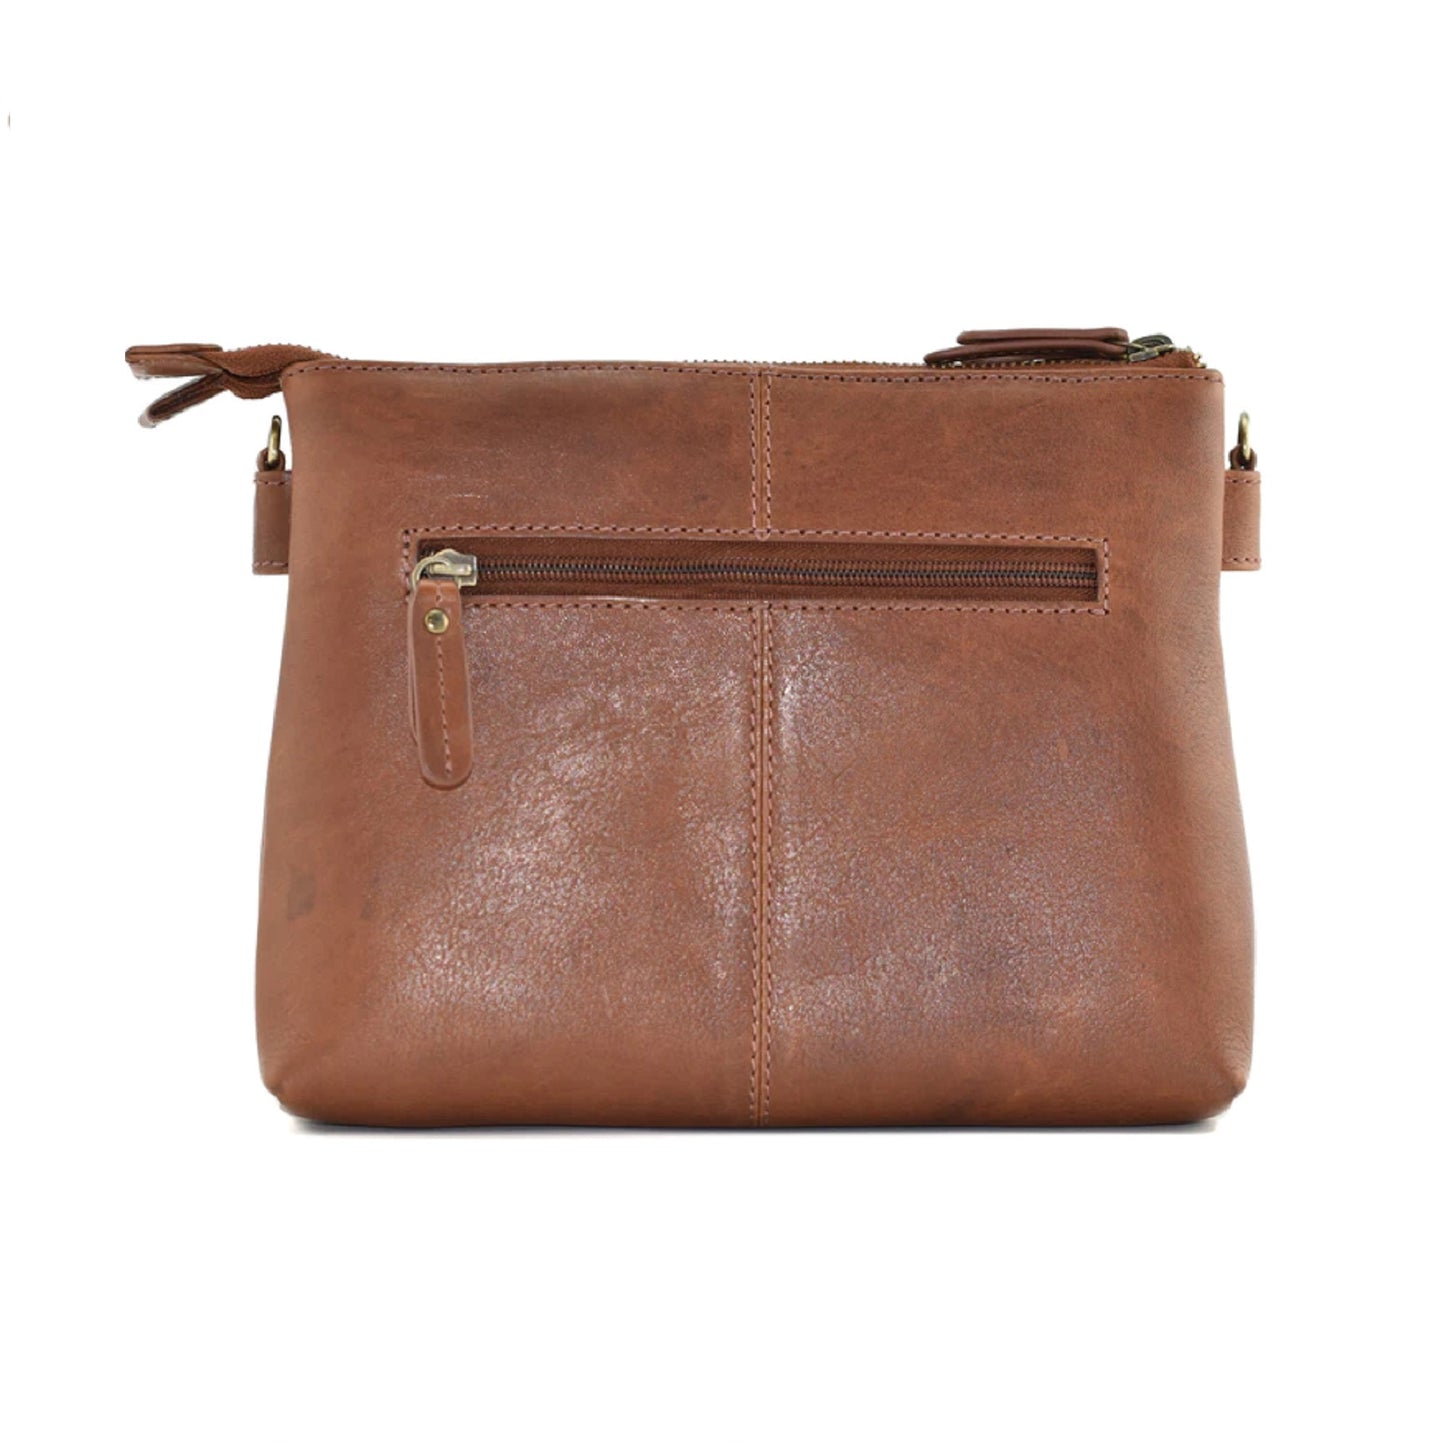 Steed Double Pocket Leather Bag - Tan